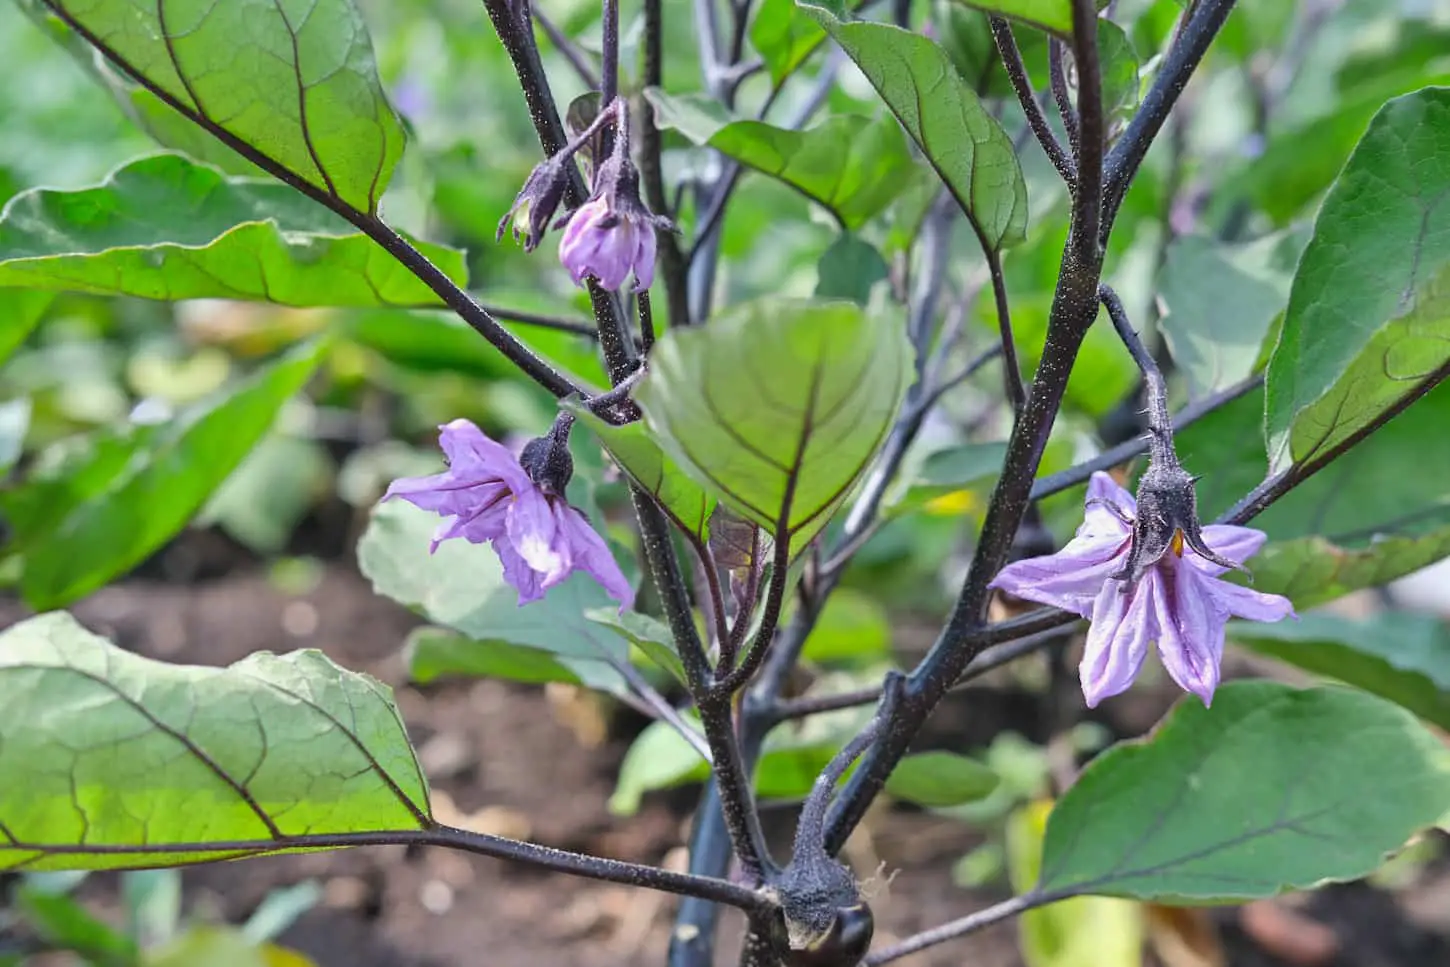 An image of eggplant flowers blooming in the garden.